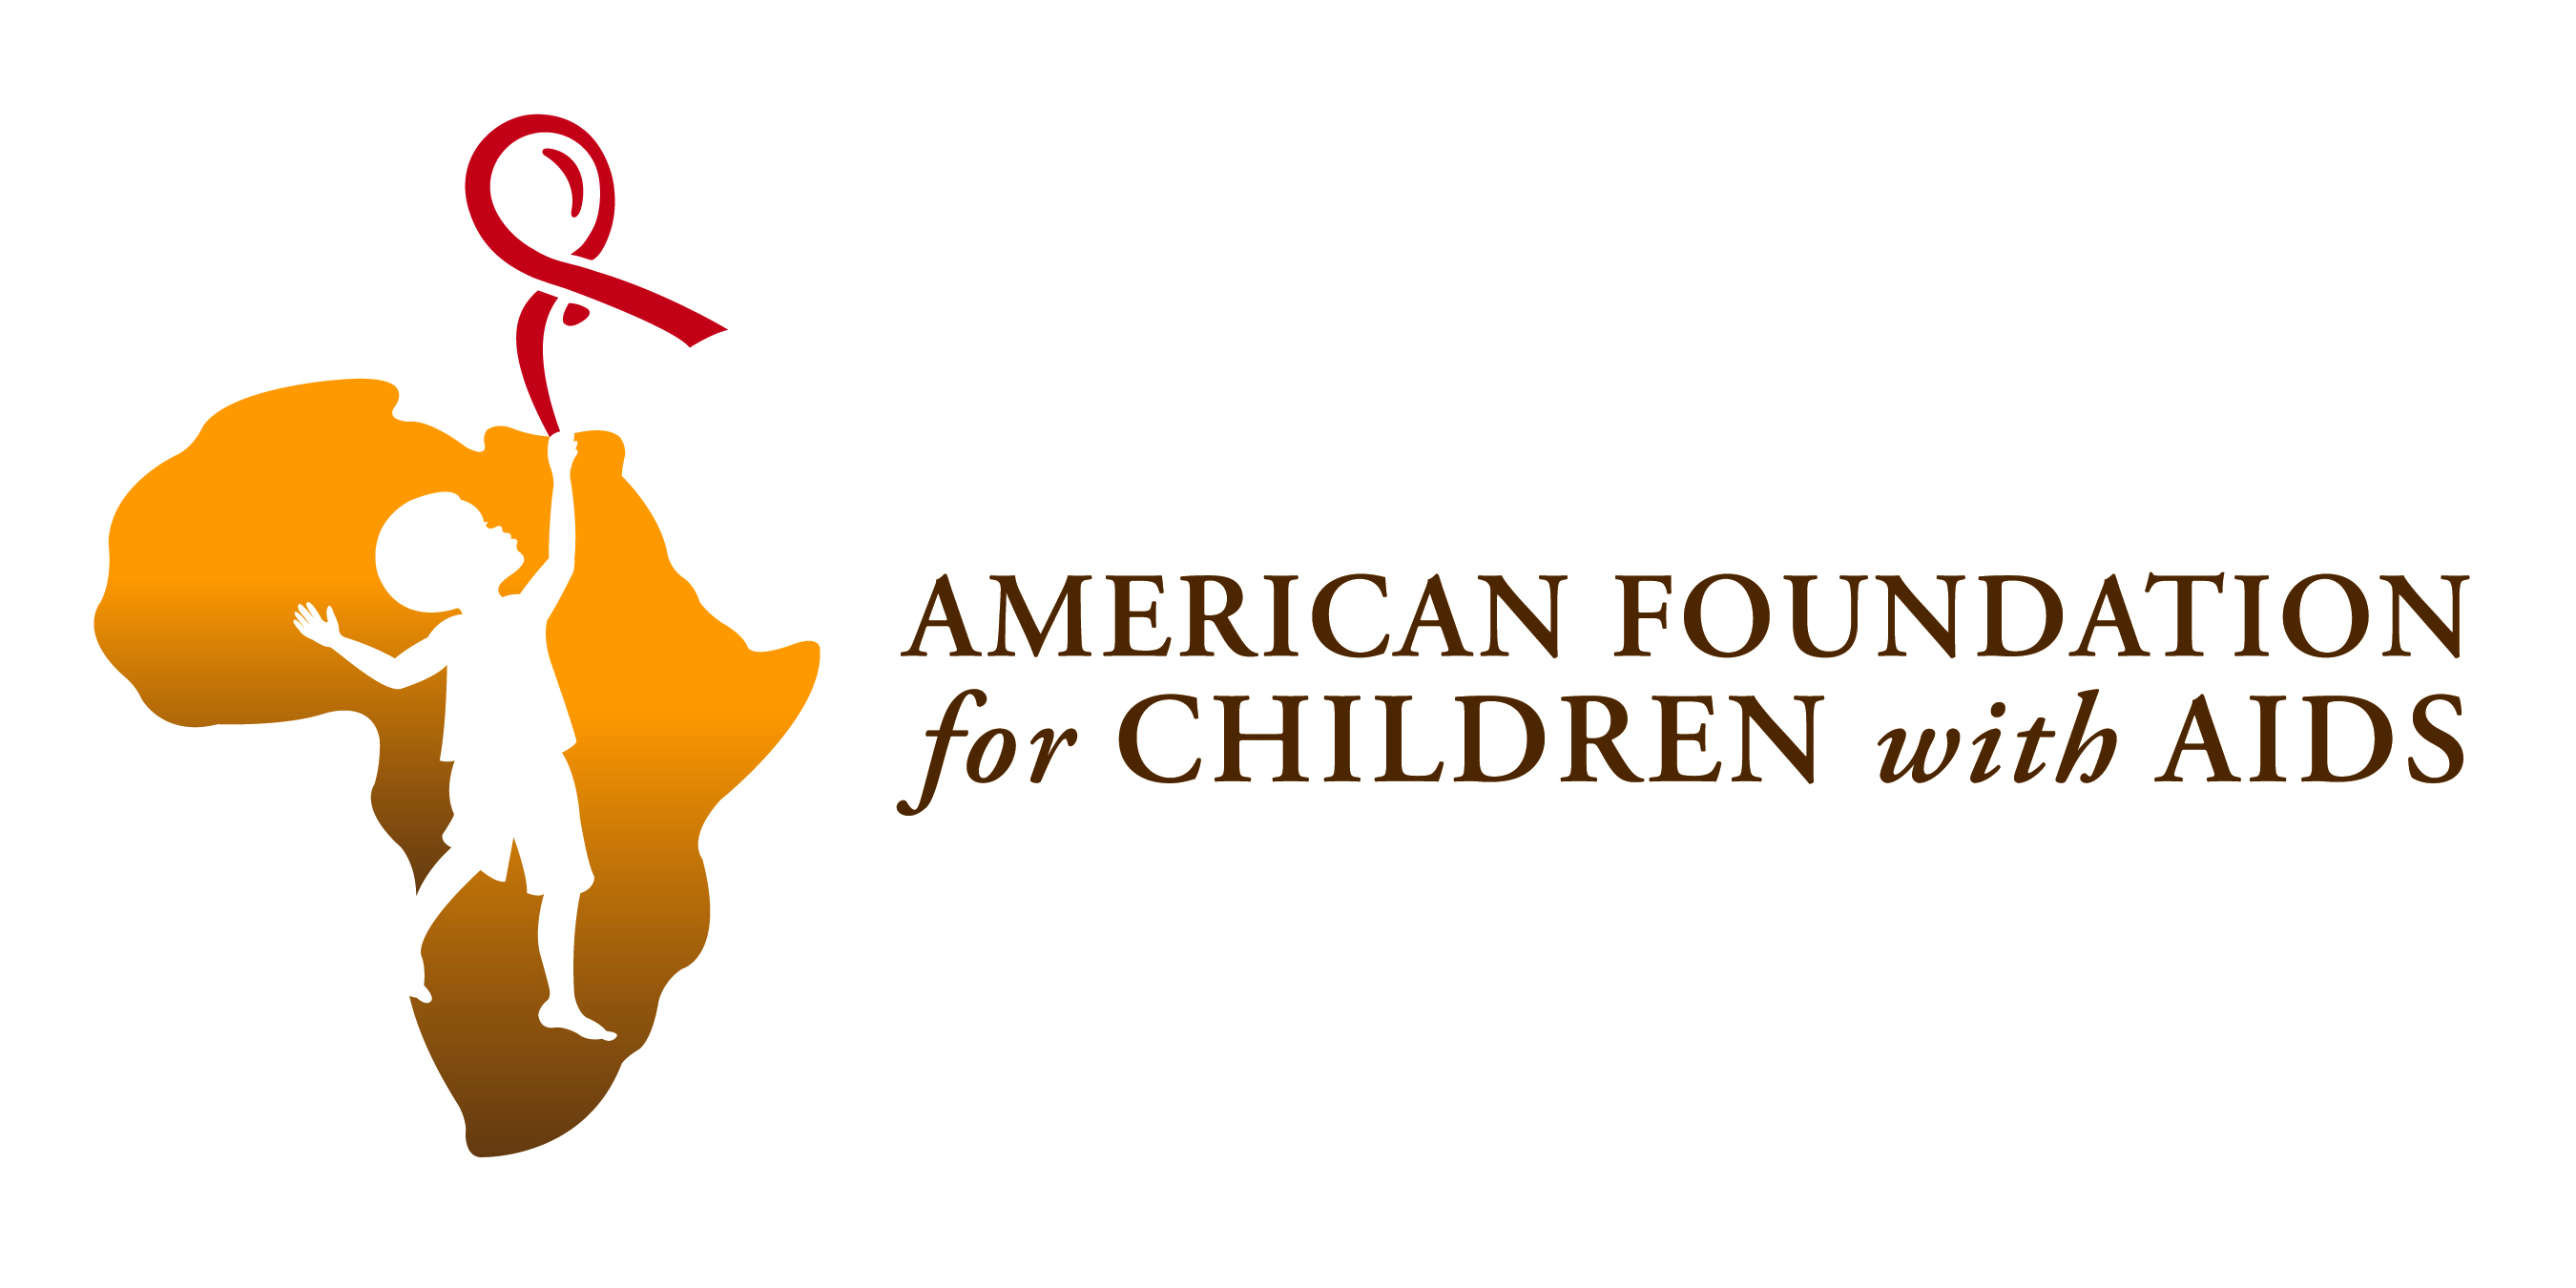 The American Foundation for Children with AIDS Partners with The Giving Block to Accept Cryptocurrency on #CryptoGivingTuesday and Beyond